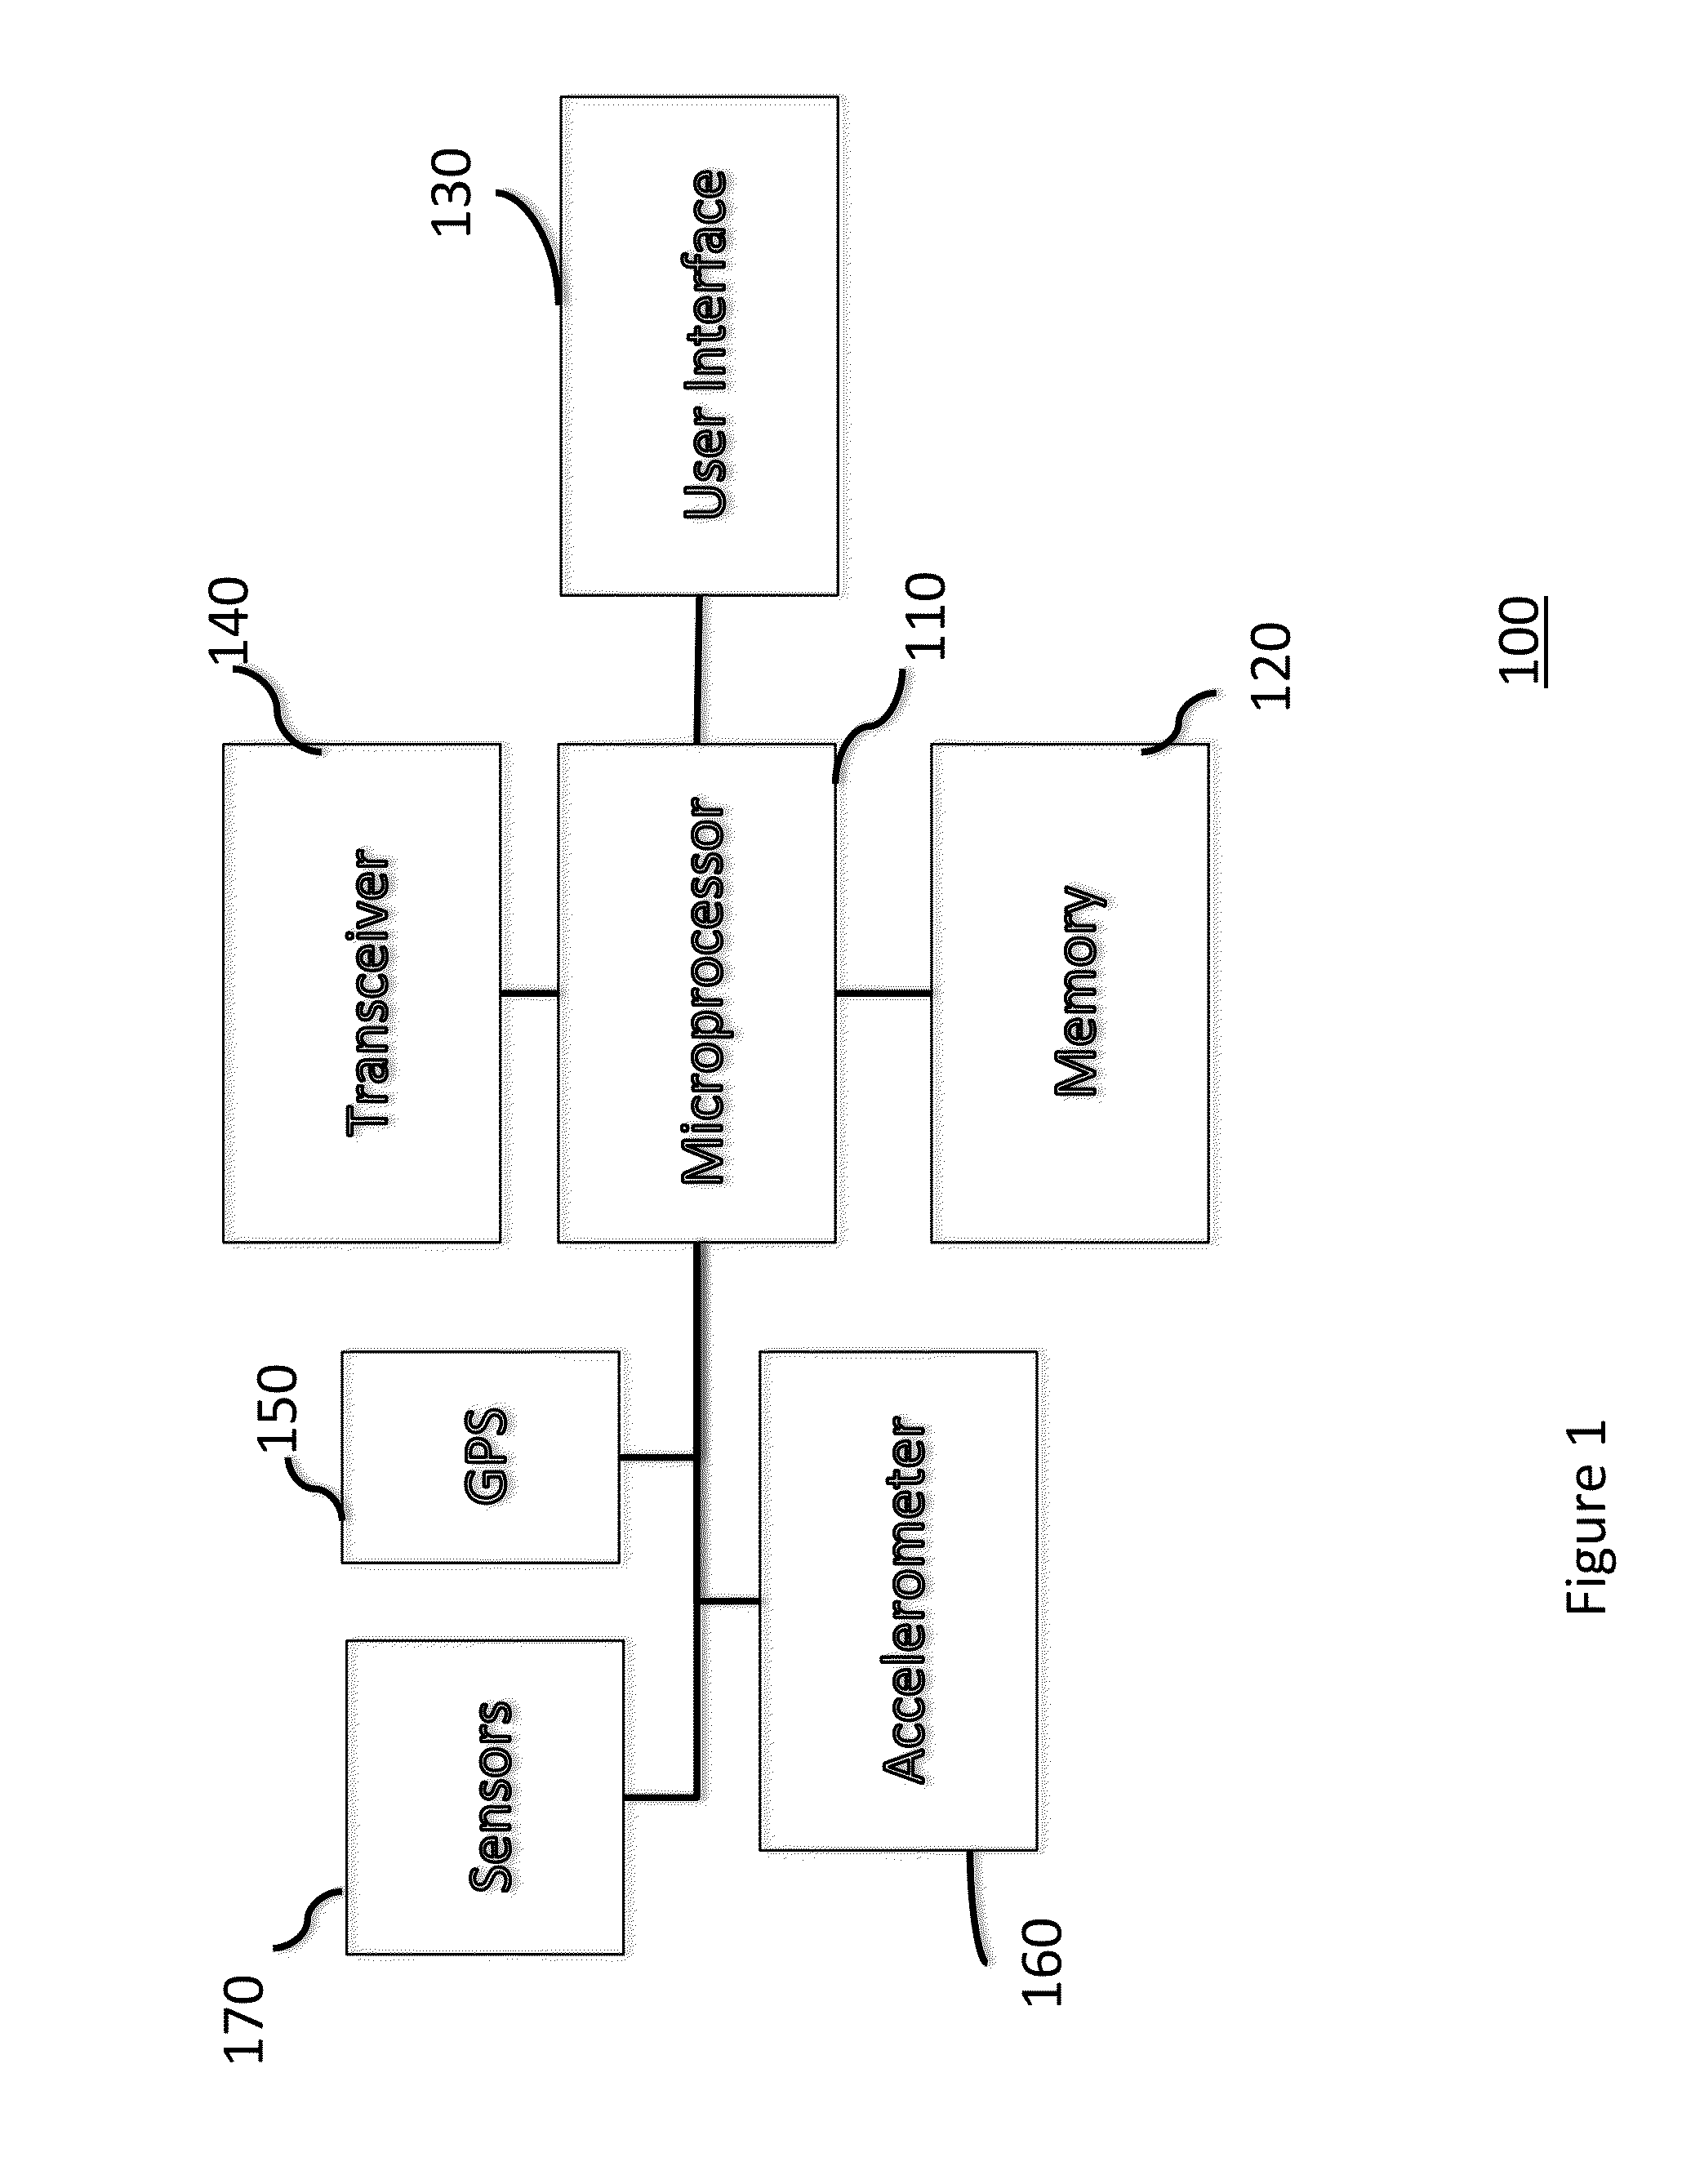 System and method to confirm participation in a car pool